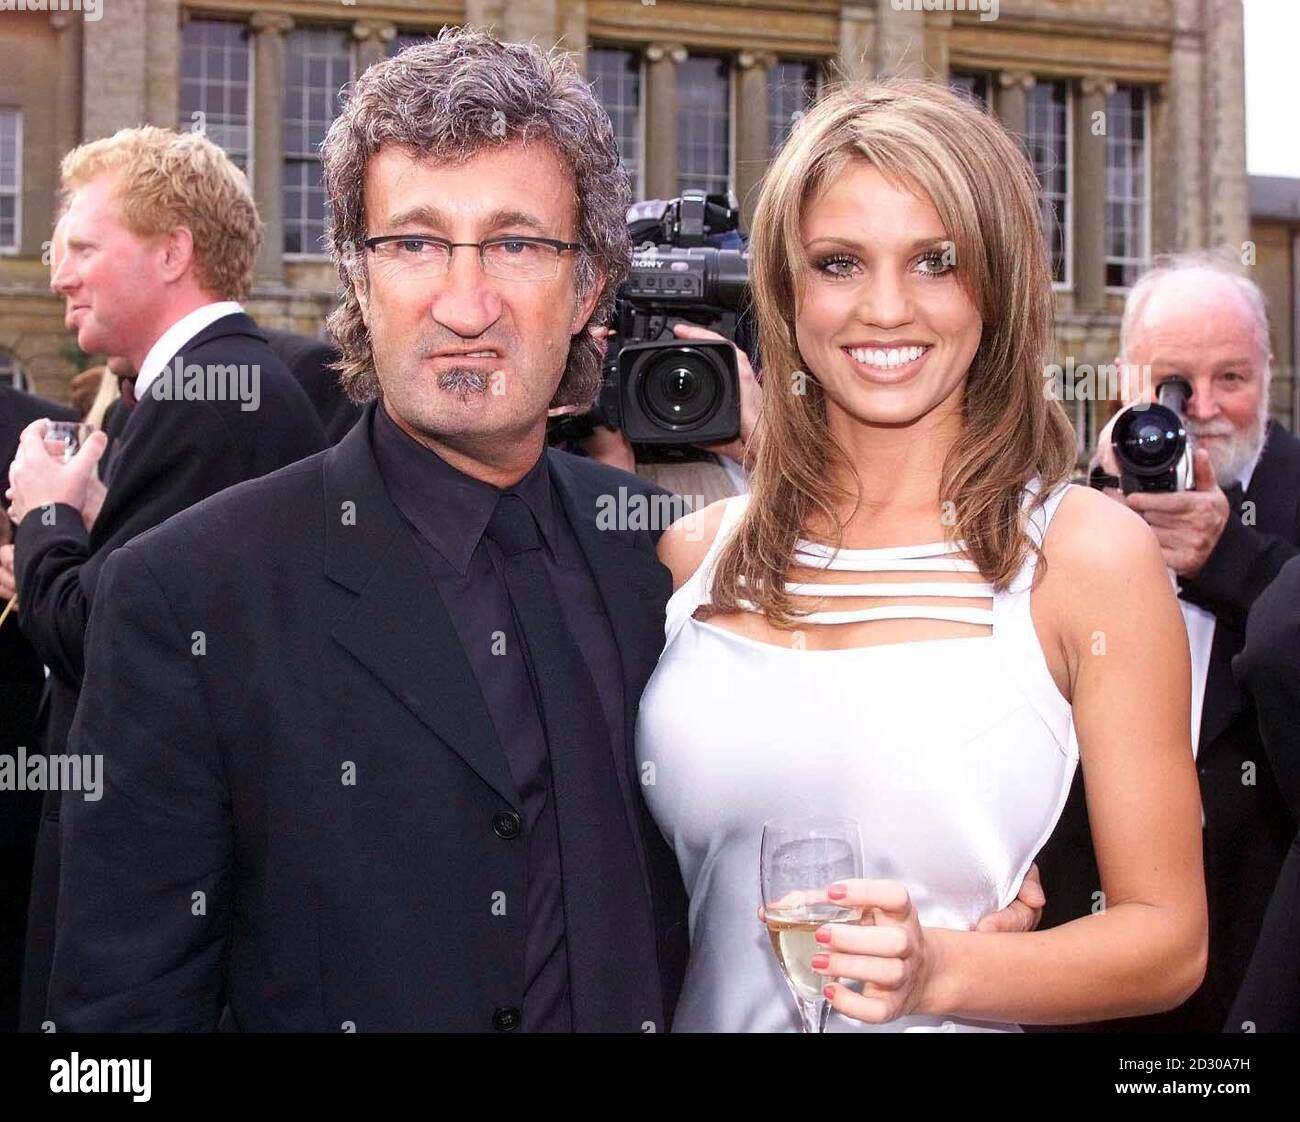 Eddie Jordan High Resolution Stock Photography and Images - Alamy